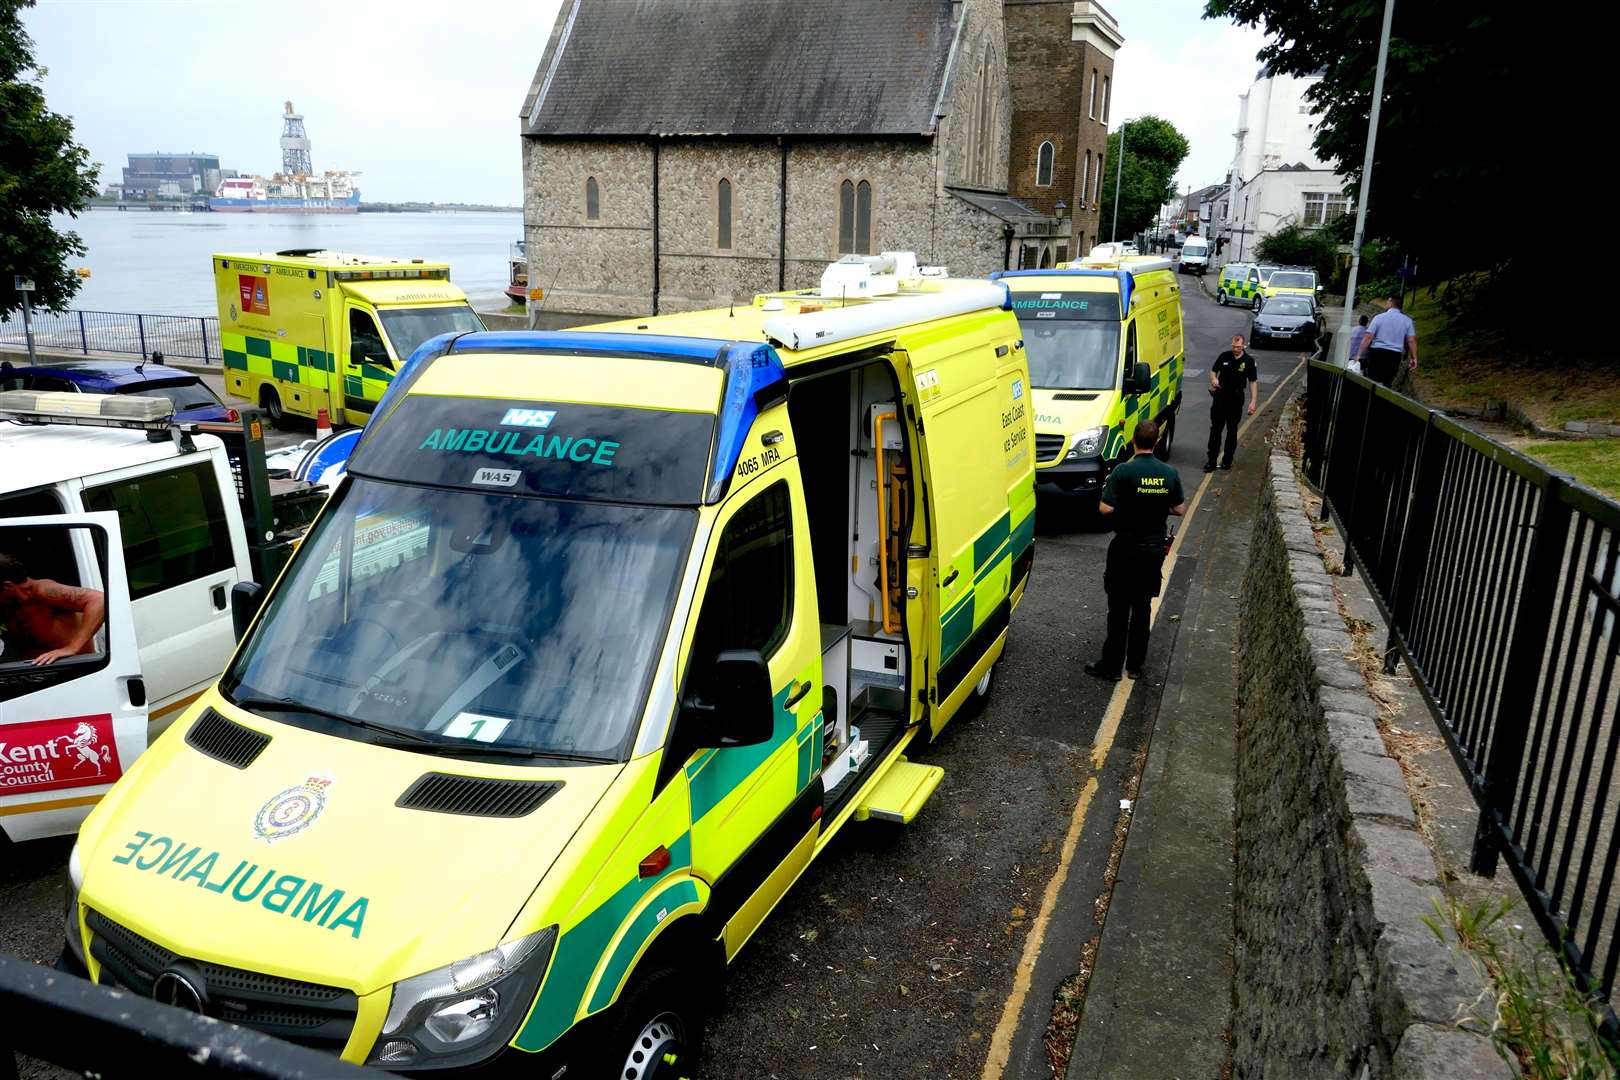 Ambulance services attended to the man who had fallen. (2905612)